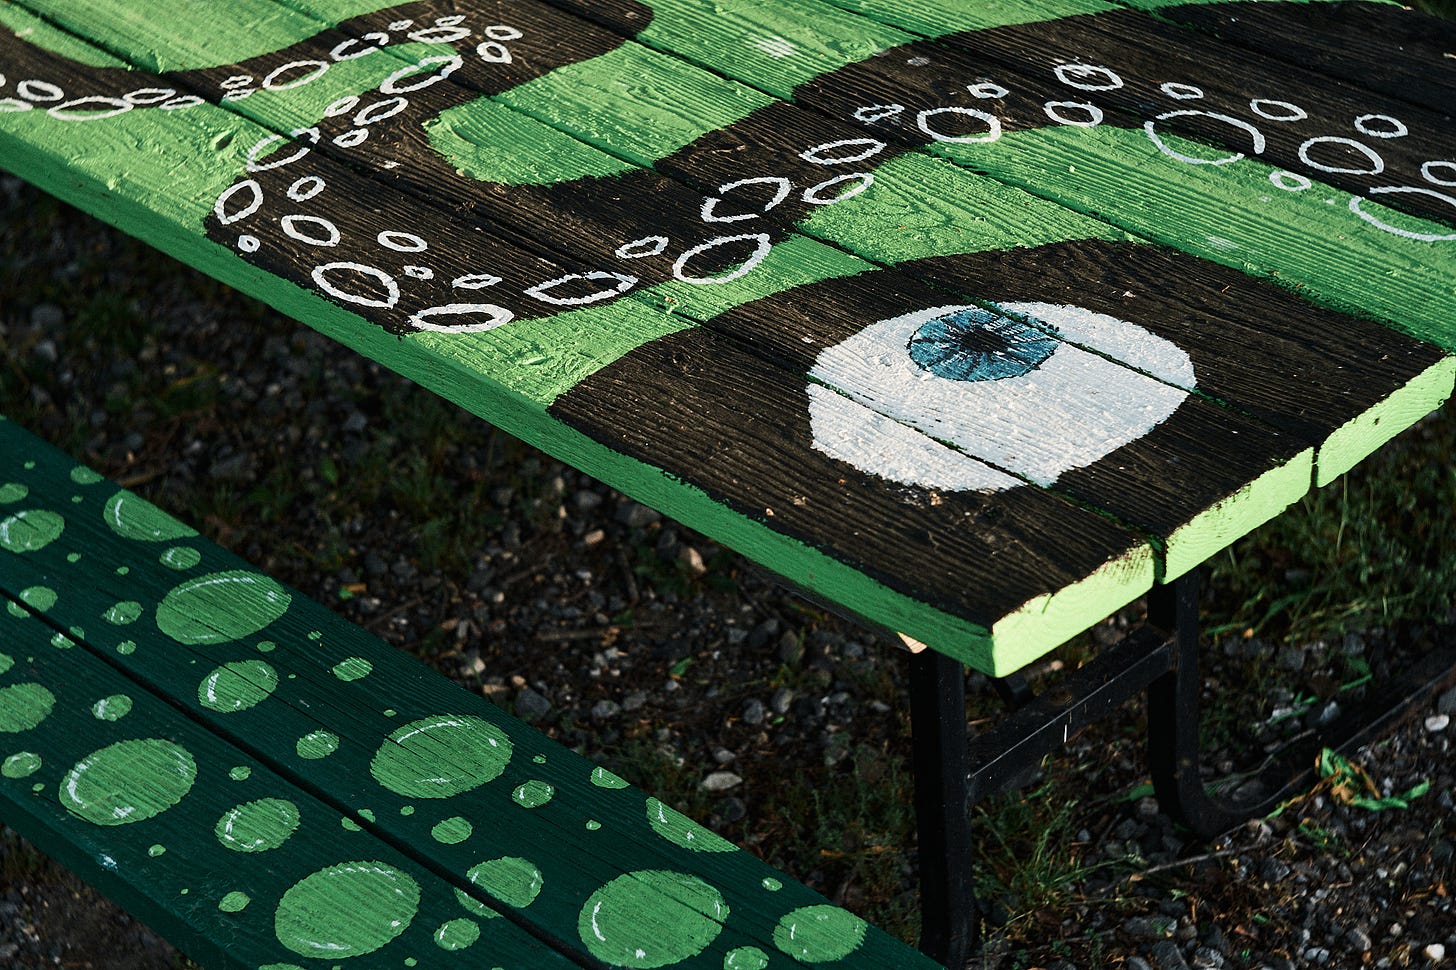 Octopus and bubble themed picnic table